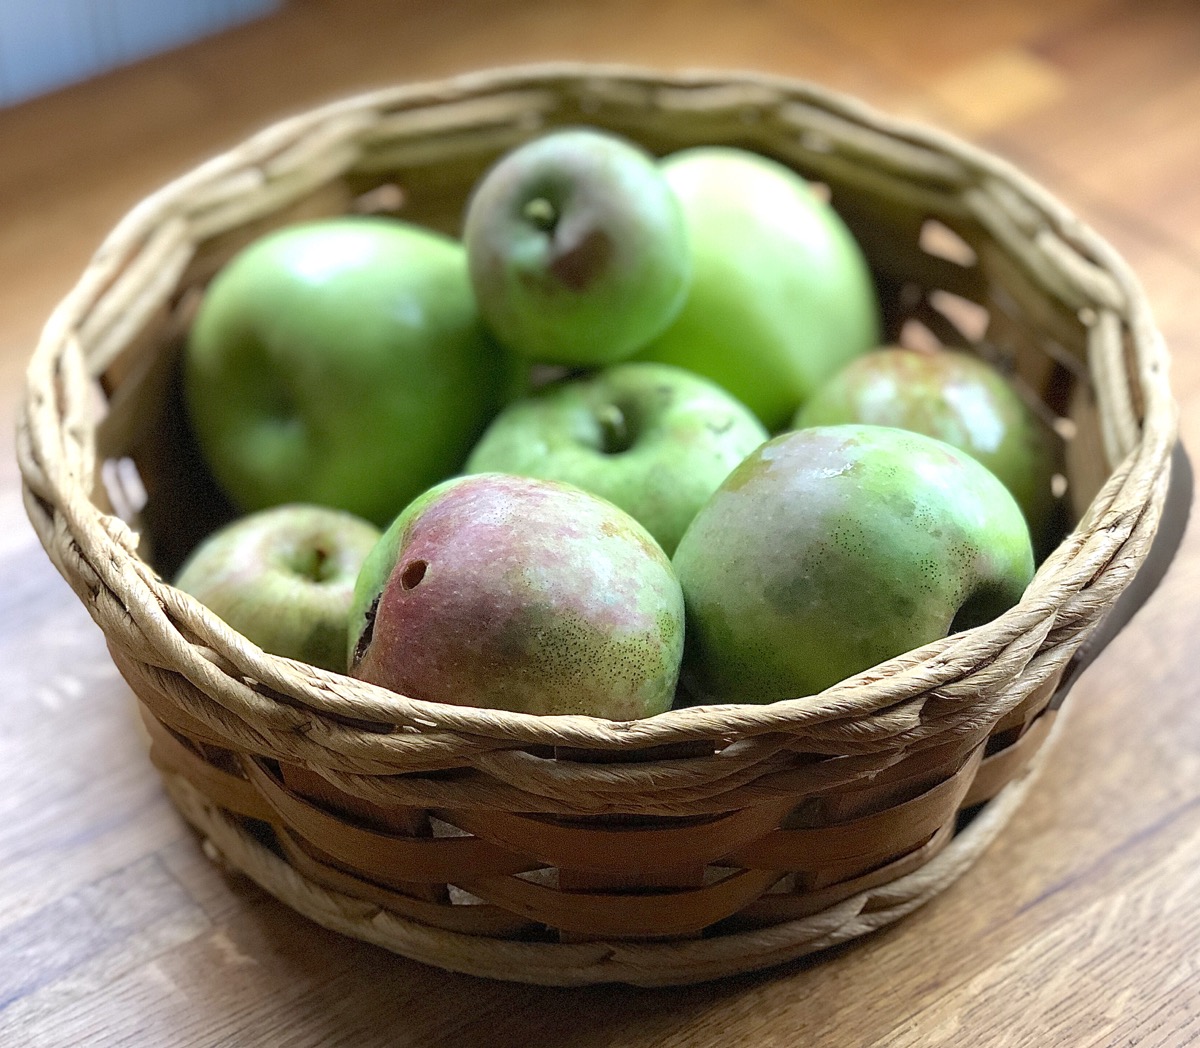 Just-picked apples in a basket.